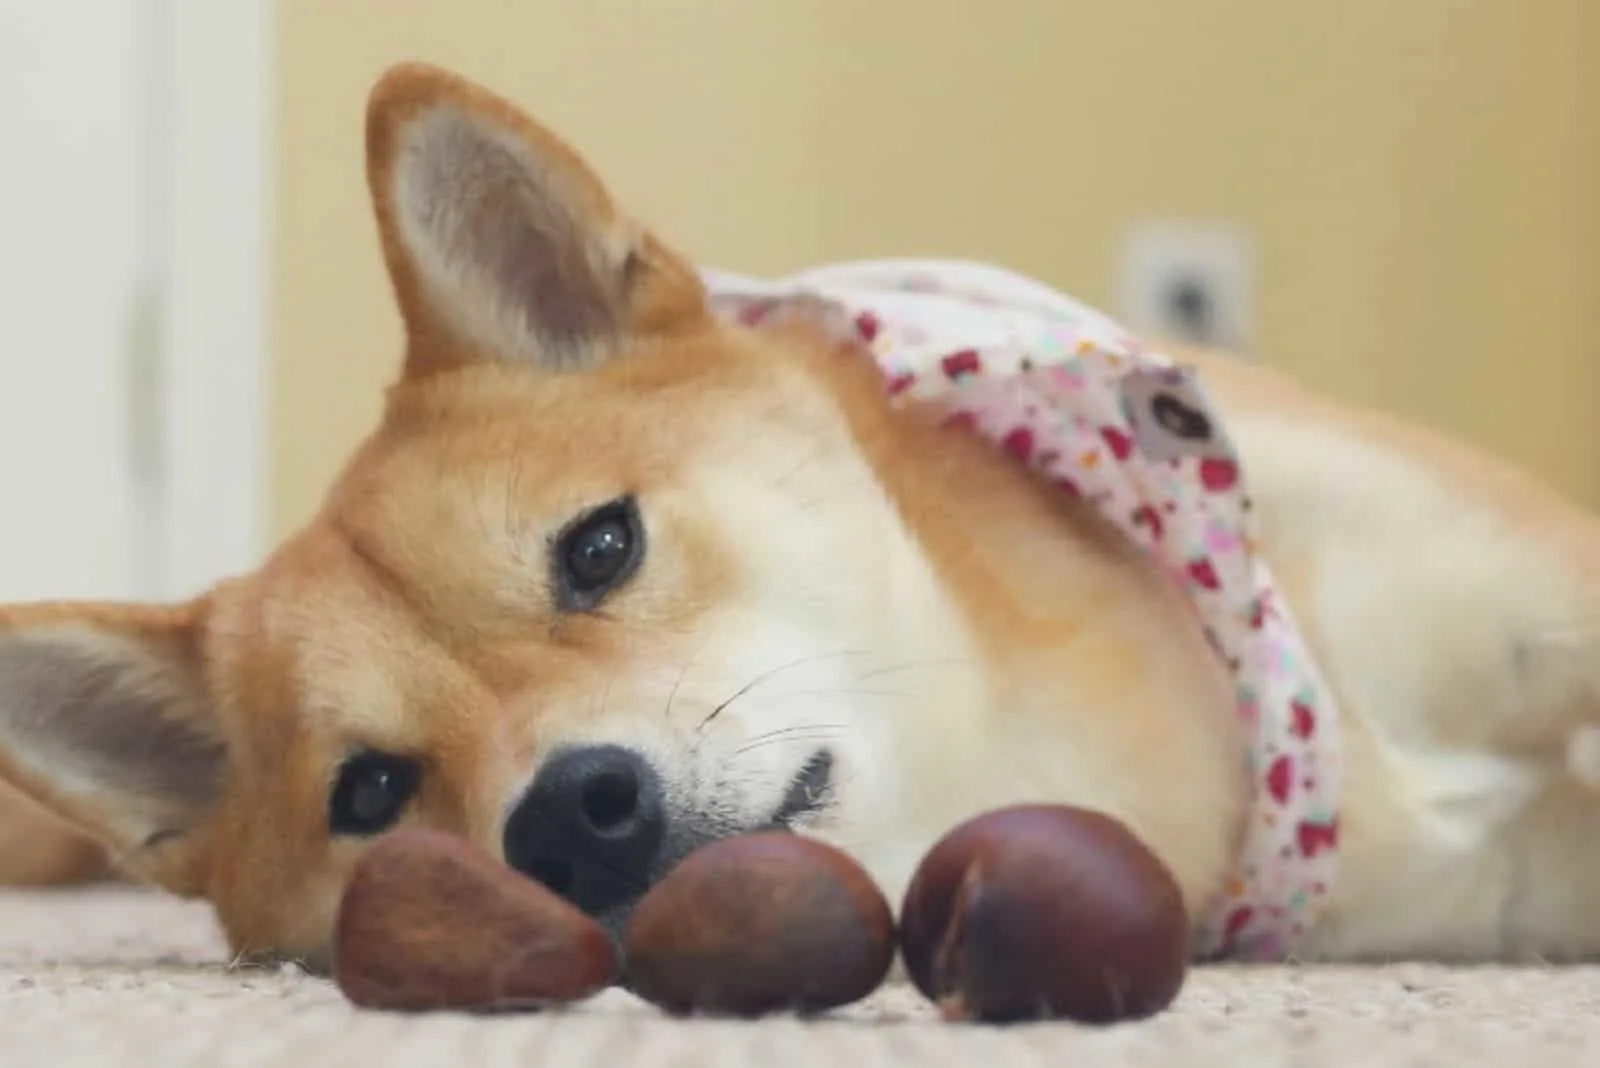 the akita inu lies and looks at the three chestnuts in front of him